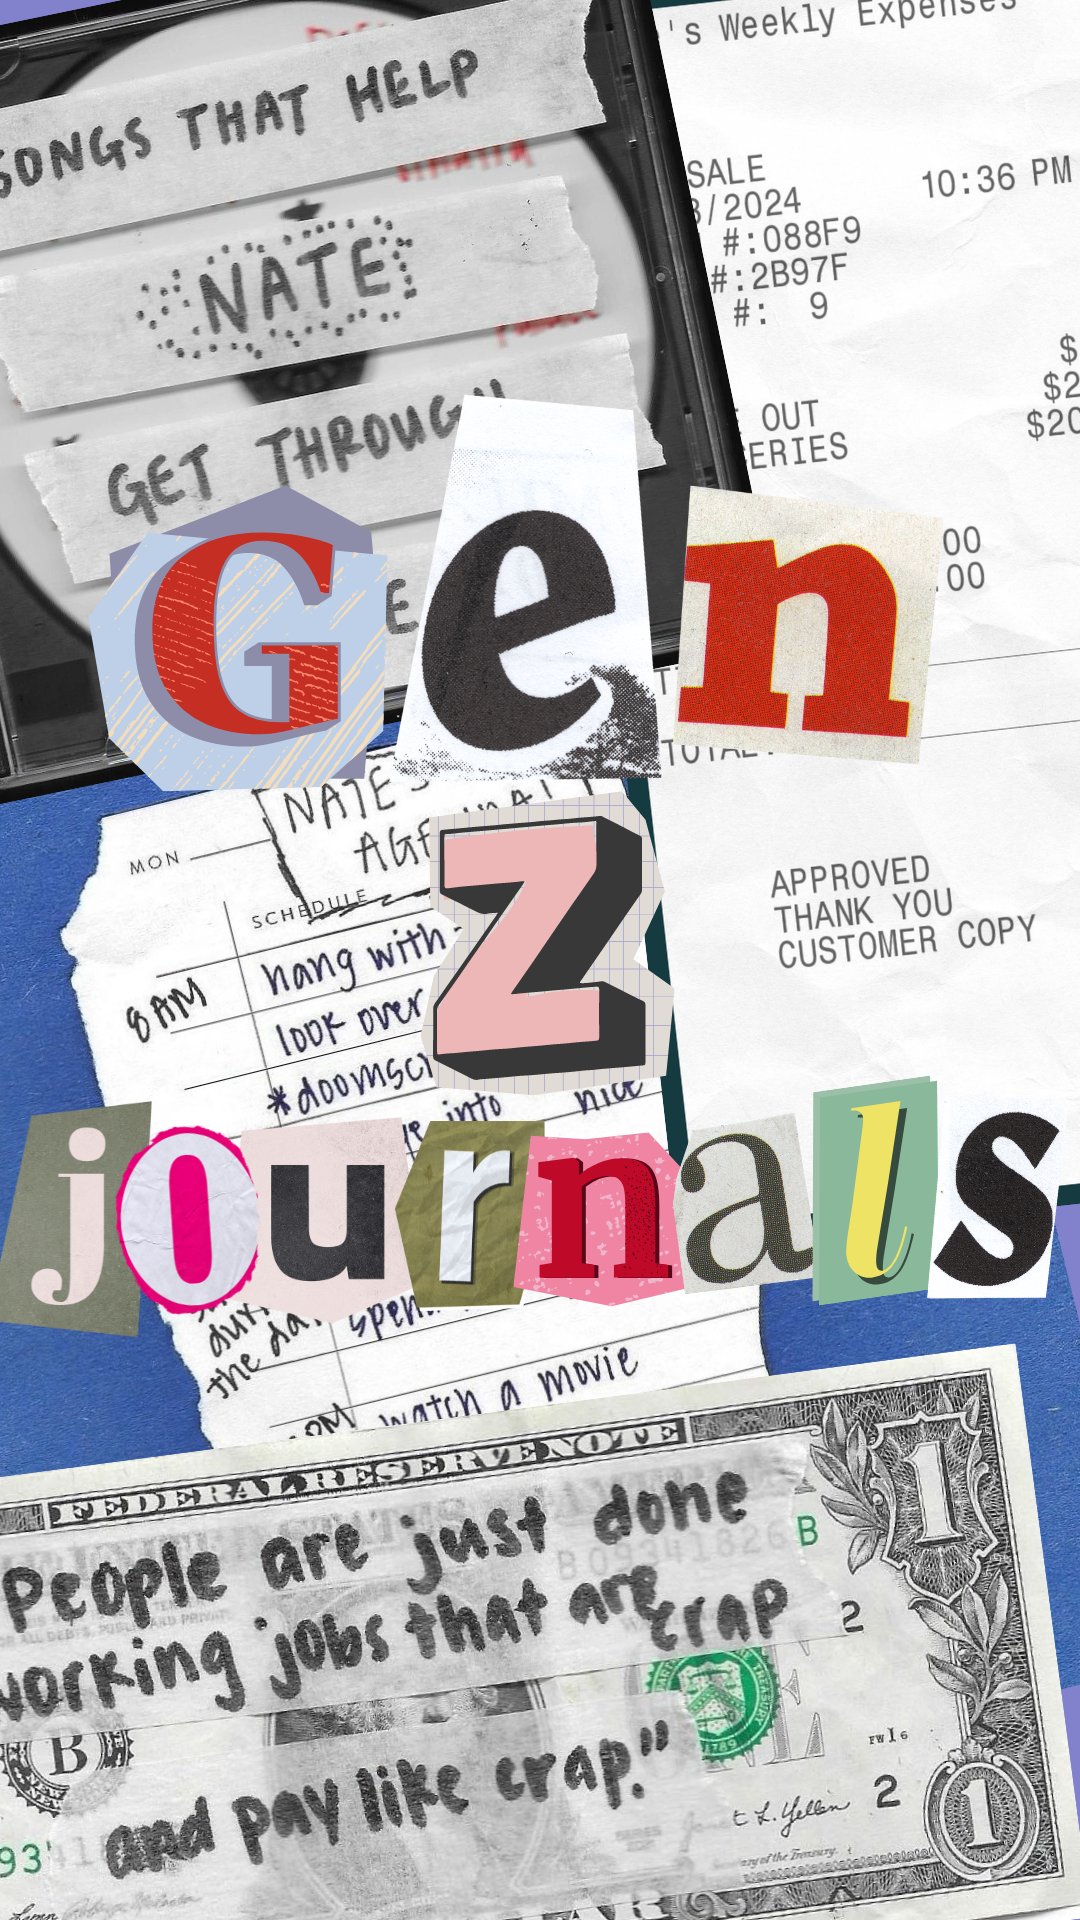 Collage of notes, receipts, and a dollar bill overlaid with &quot;Gen Z Journals&quot; text, symbolizing financial and personal struggles